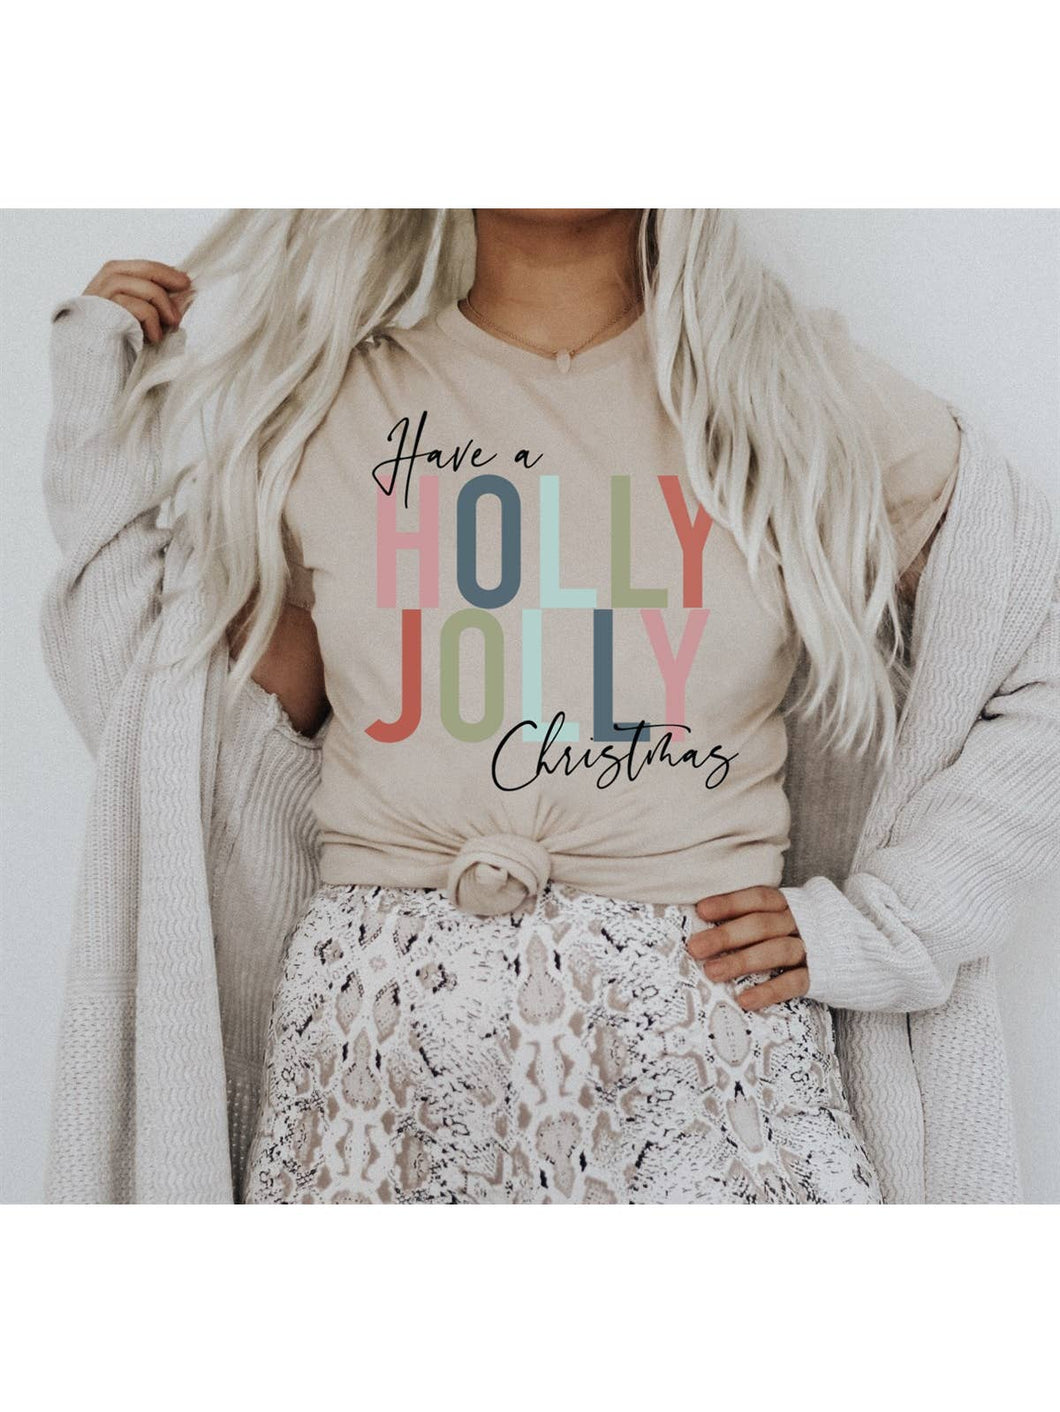 Have A Holly Jolly Christmas T-shirt